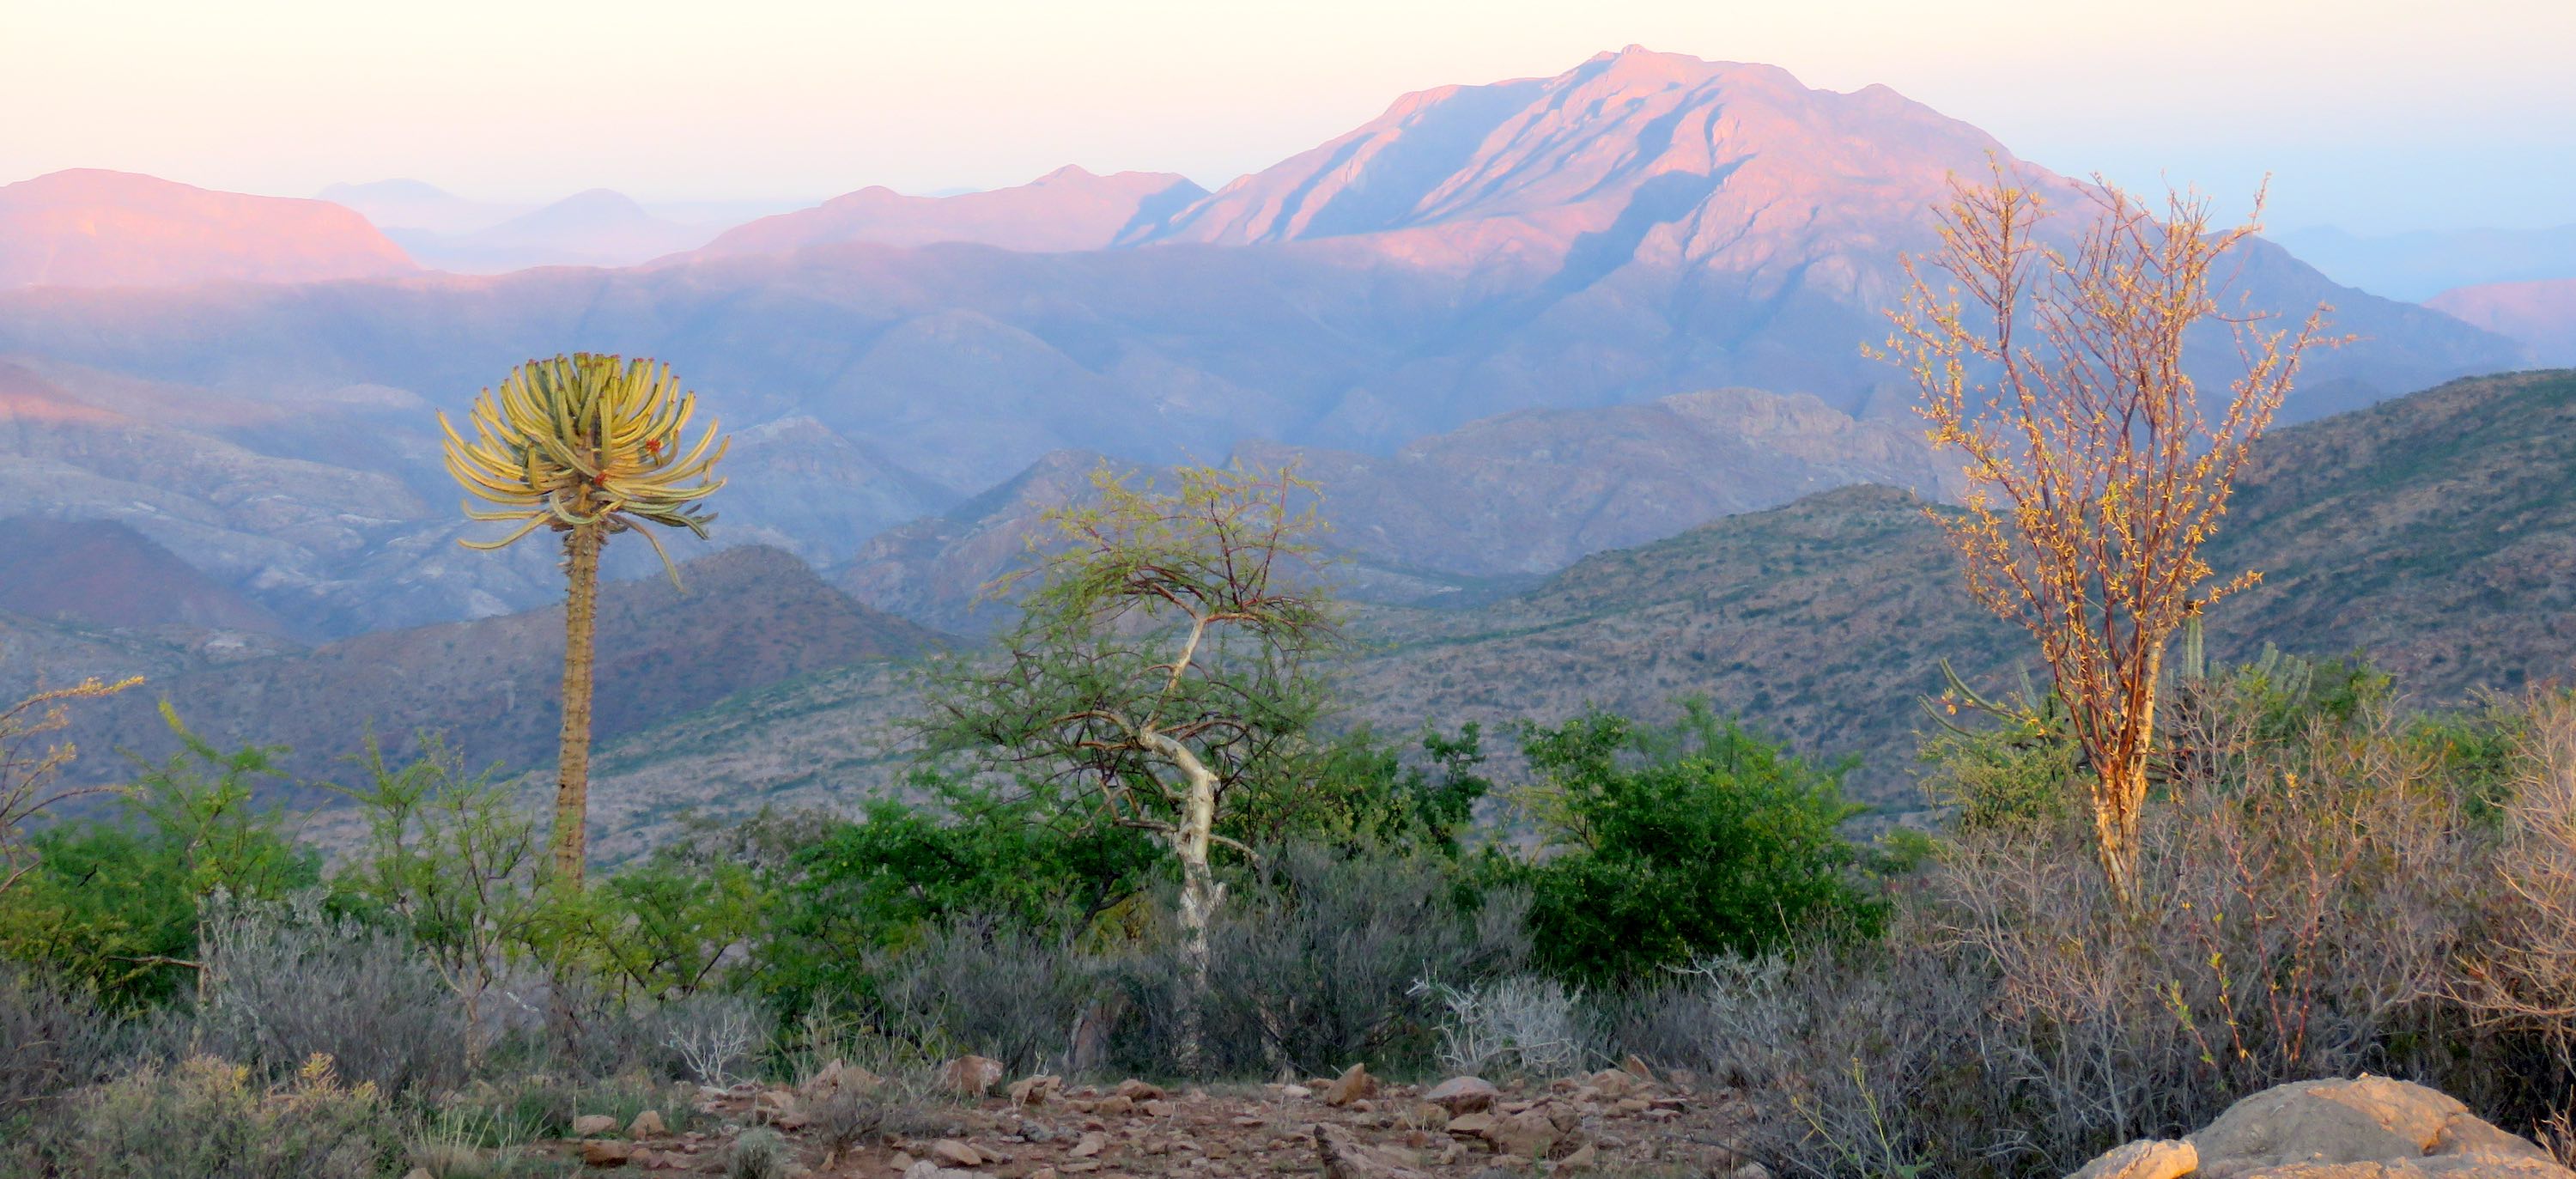 Exotic looking bushes in the foreground with pink-topped mountains in the background.